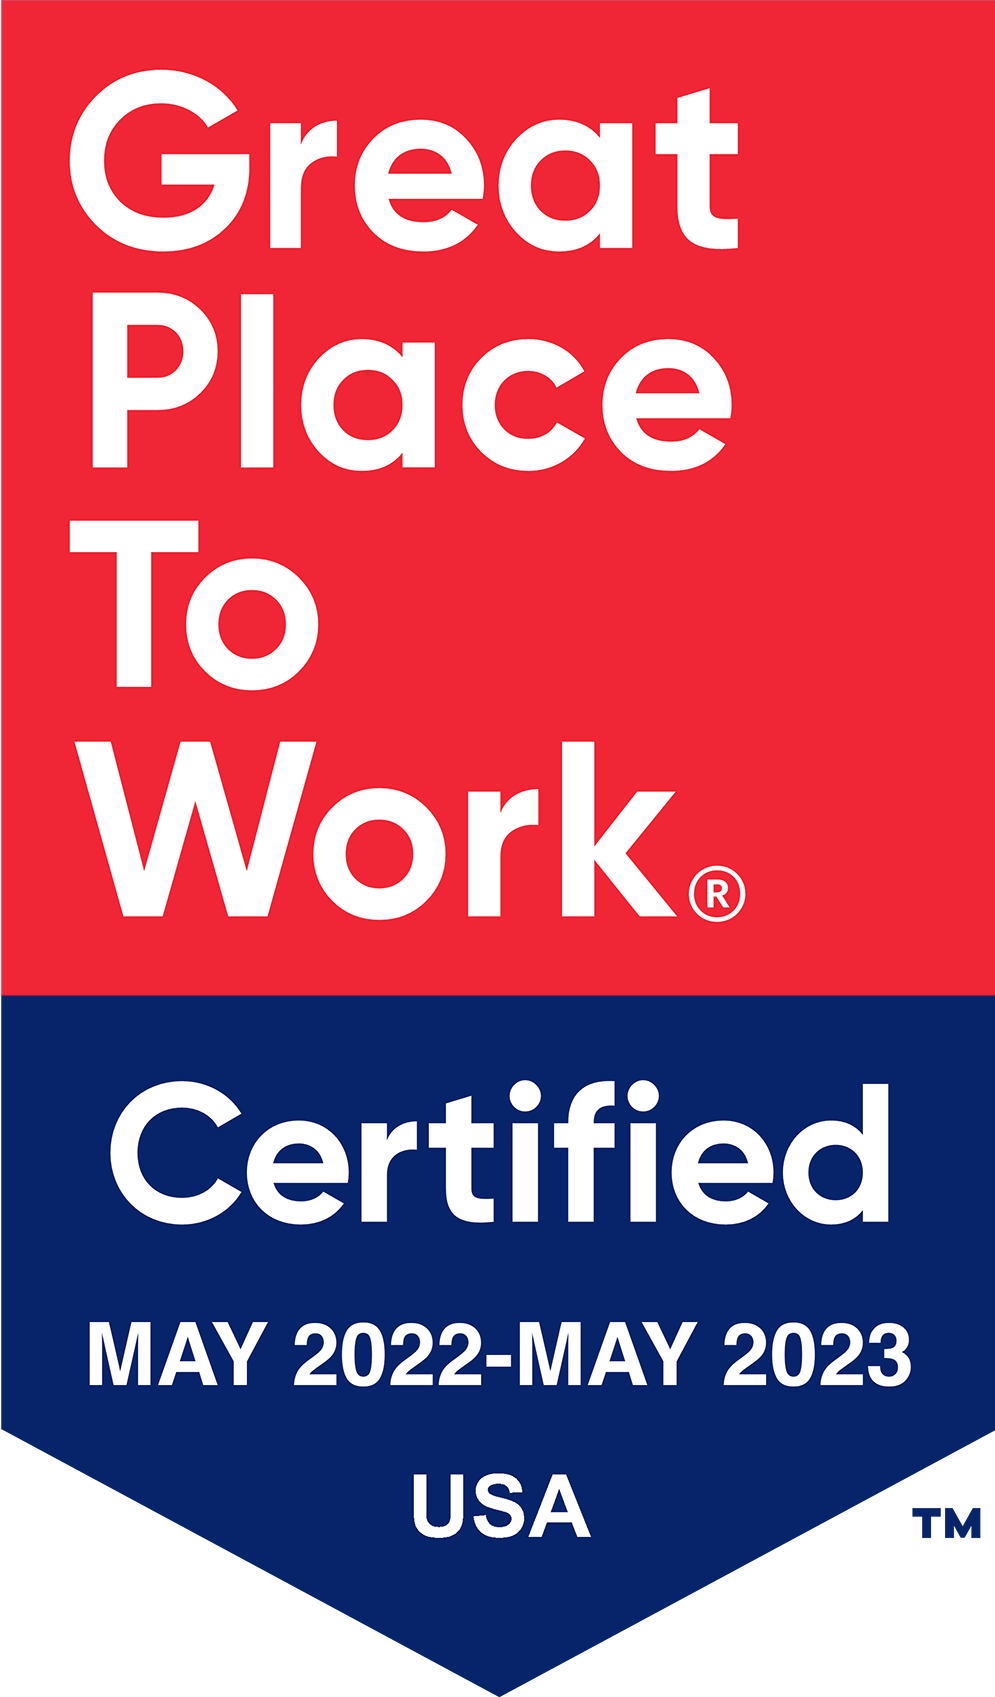 Great Place To Work - Certified May 2022-May 2023